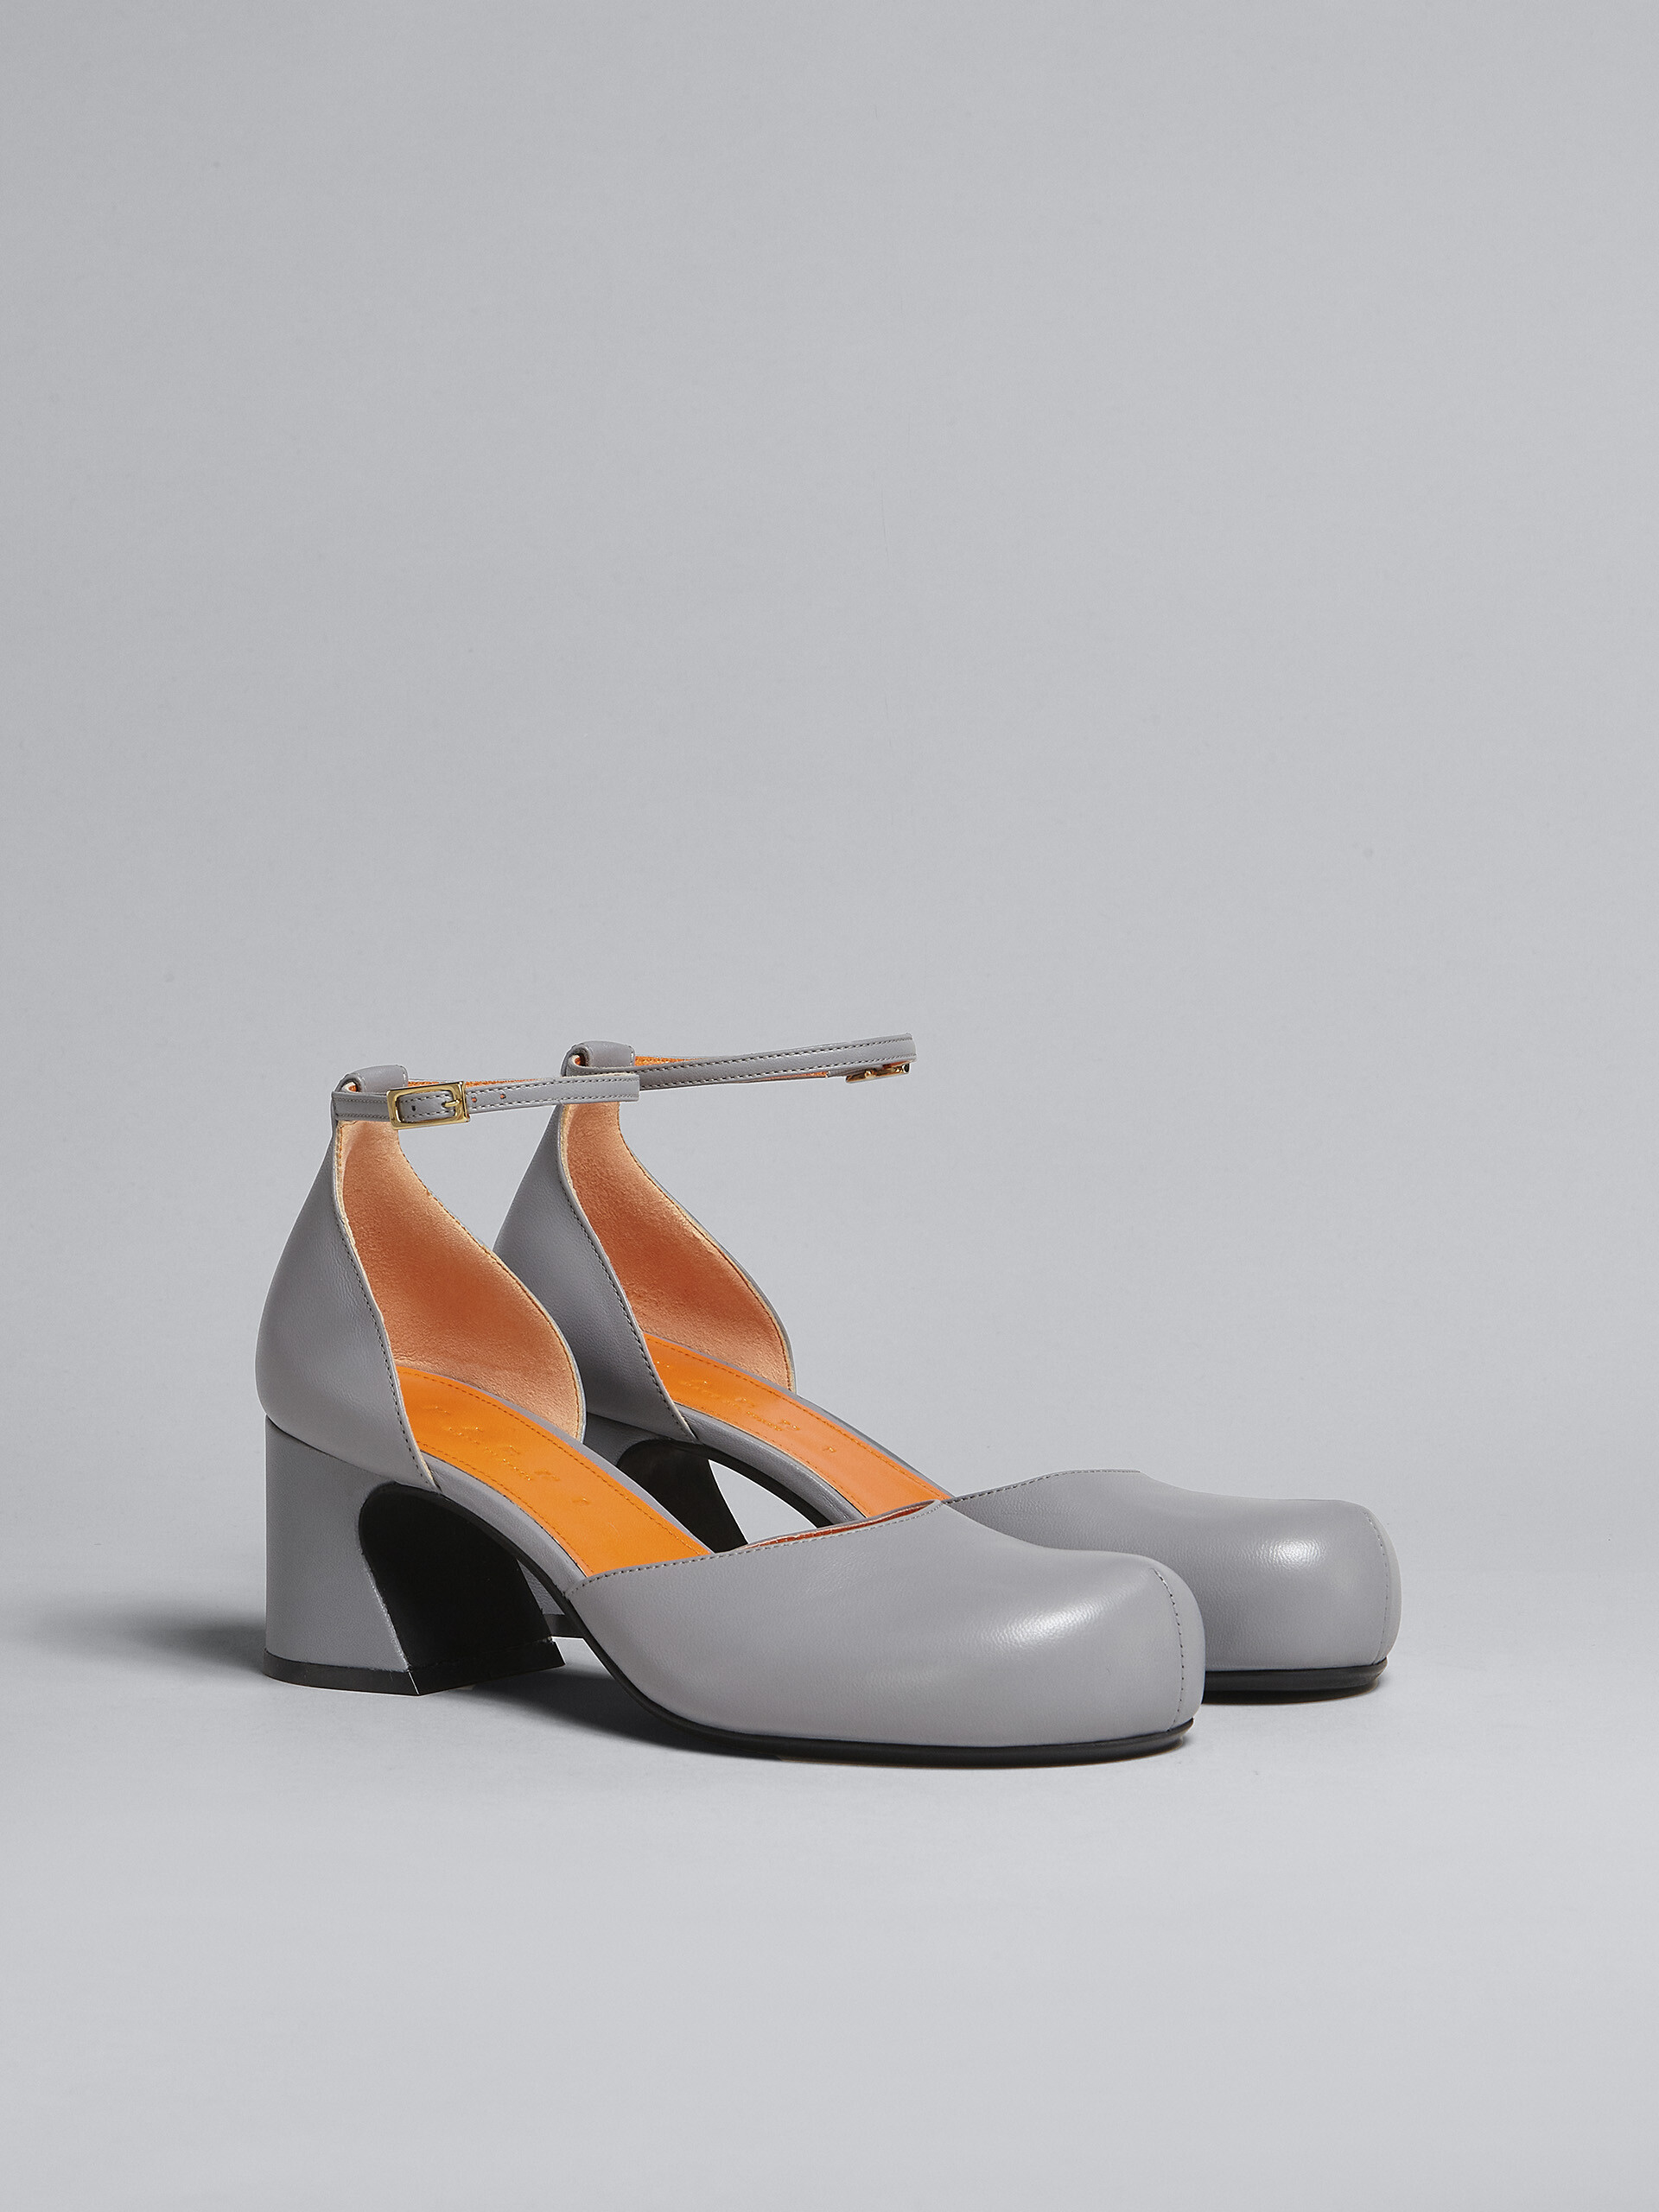 Grey leather Mary Jane pump - Pumps - Image 2